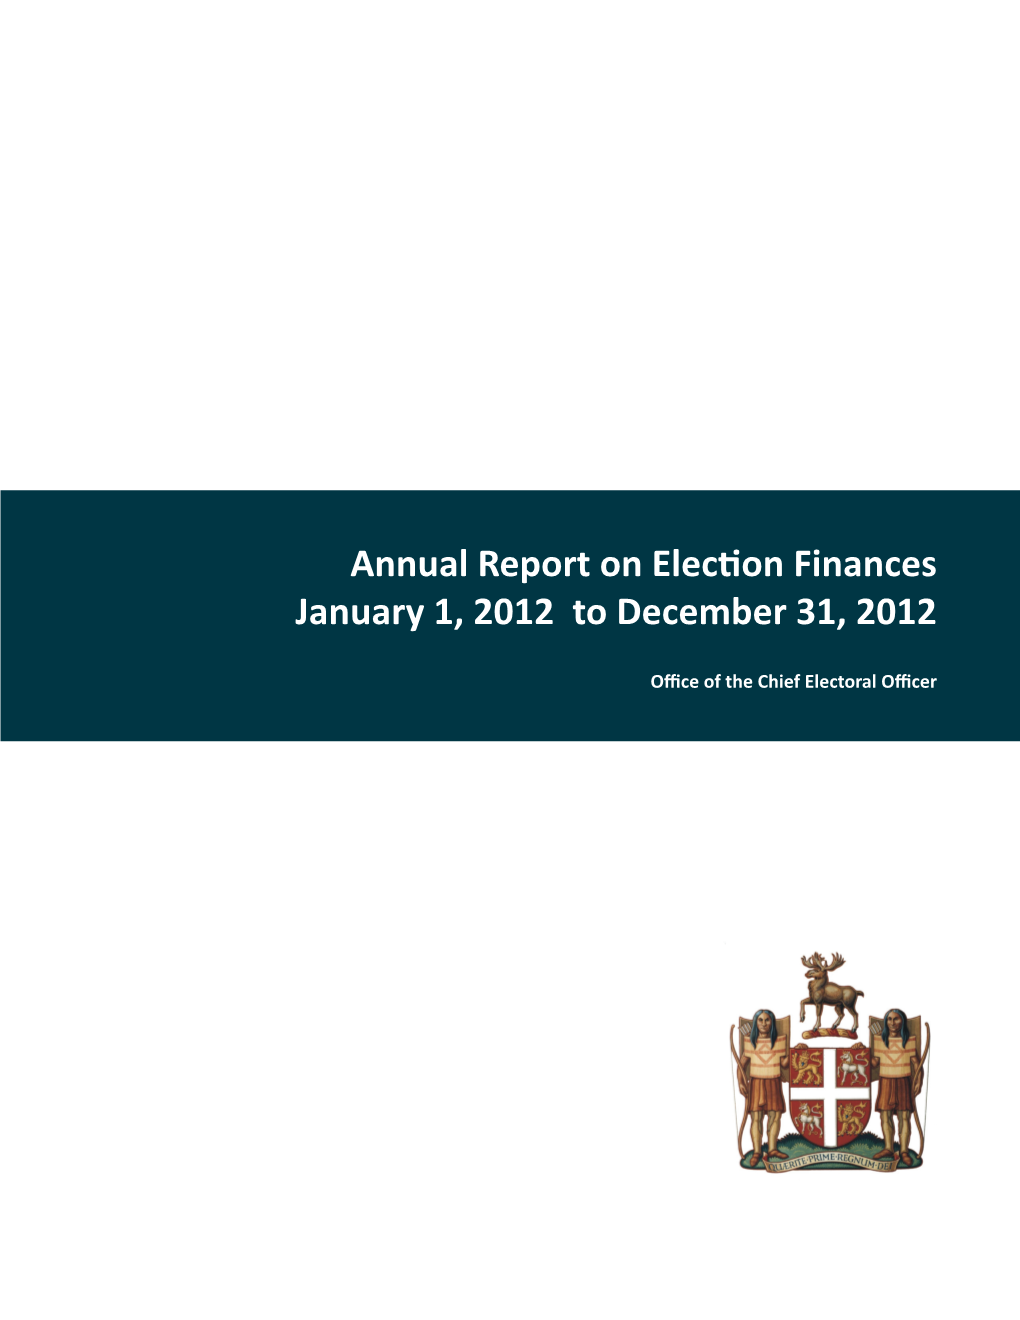 Annual Report on Election Finances January 1, 2012 to December 31, 2012